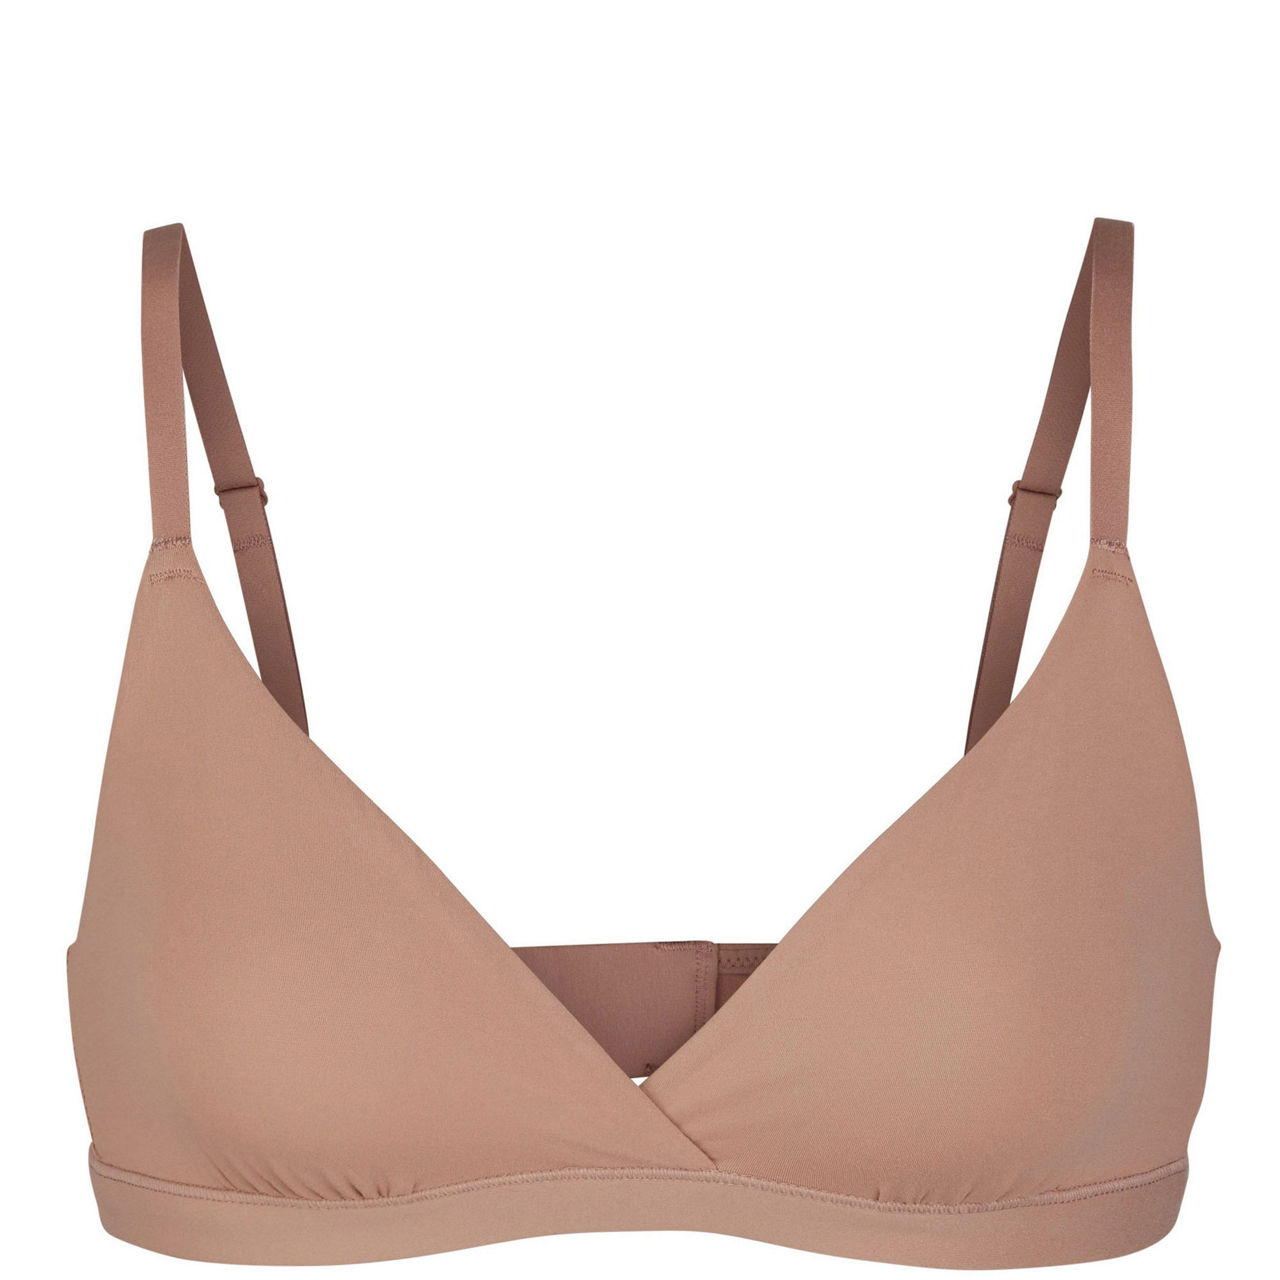 Track Fits Everybody Lace Triangle Bralette - Sand - XS at Skims